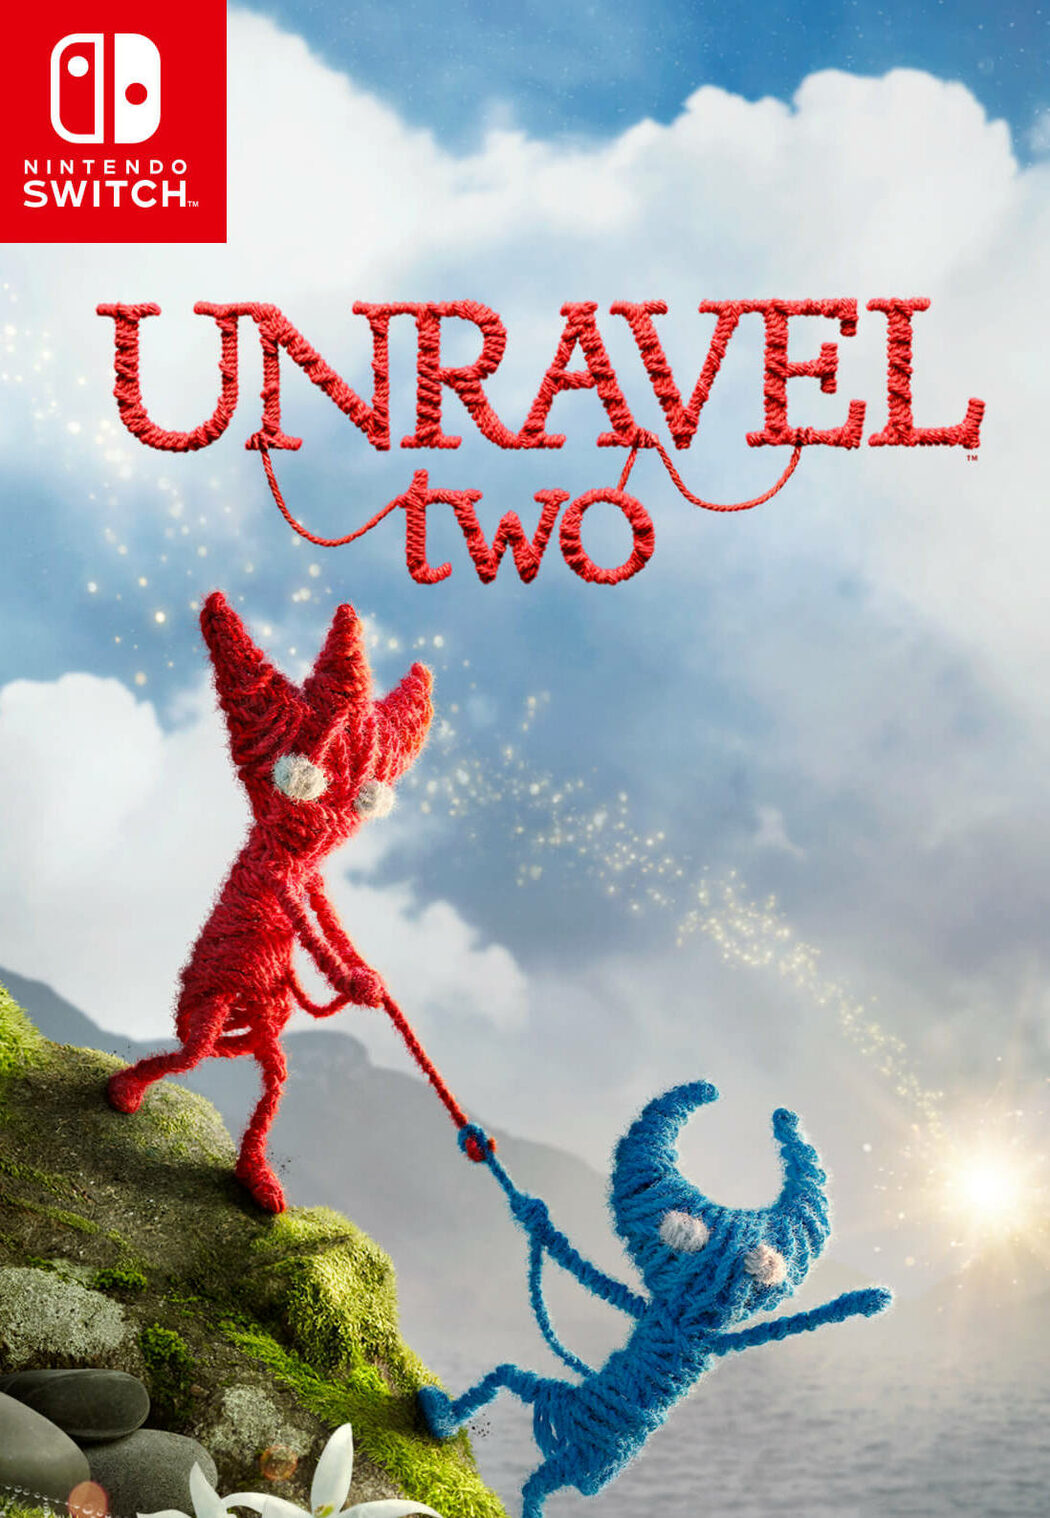 Buy Unravel Best Two Key | Switch Nintendo ENEBA the Price! at for